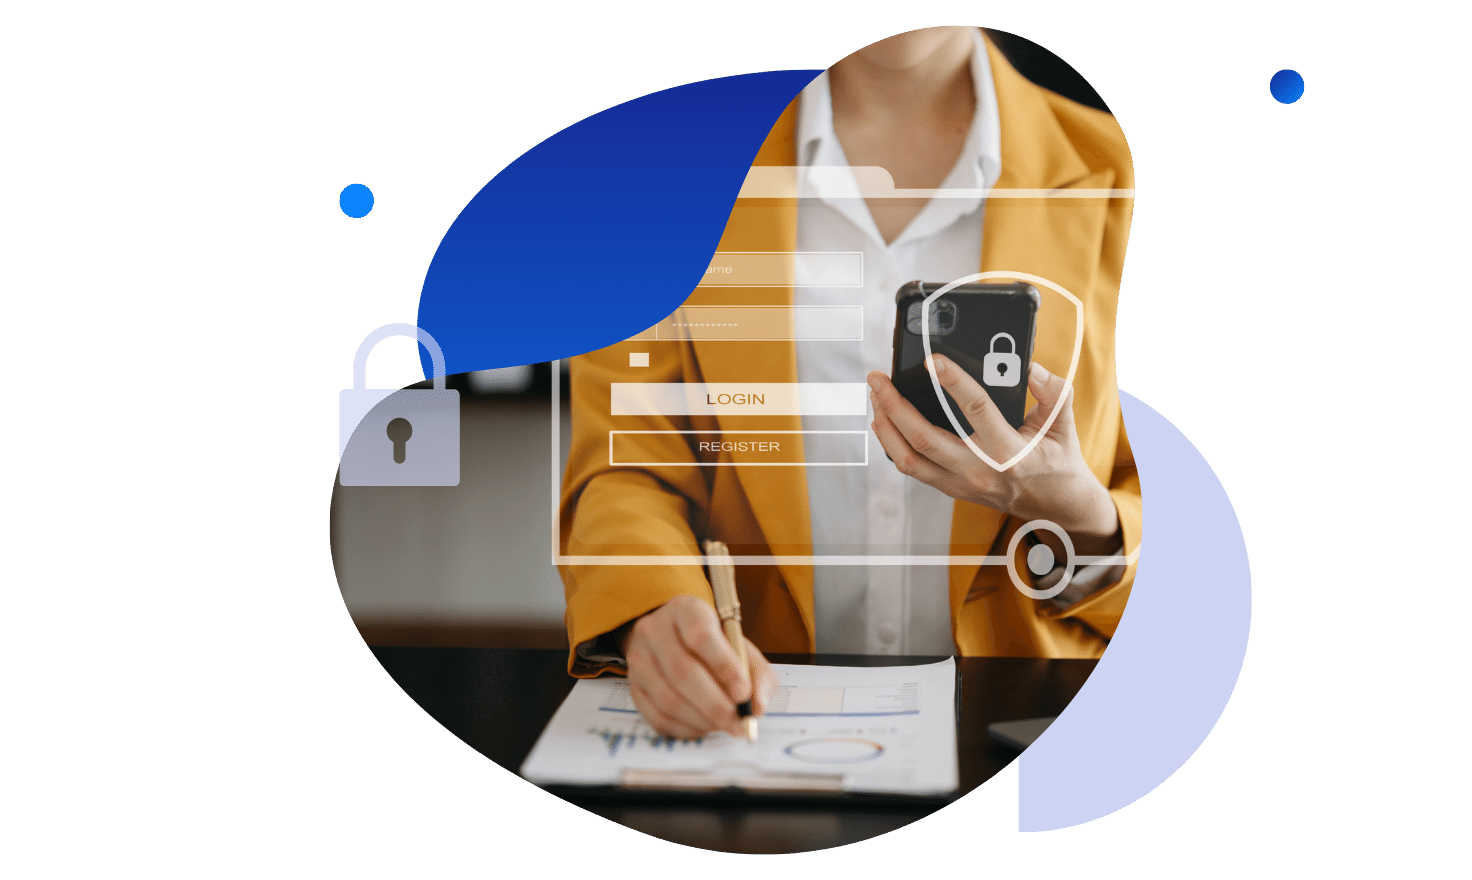 employee accessing cloud application on smartphone with secure login 